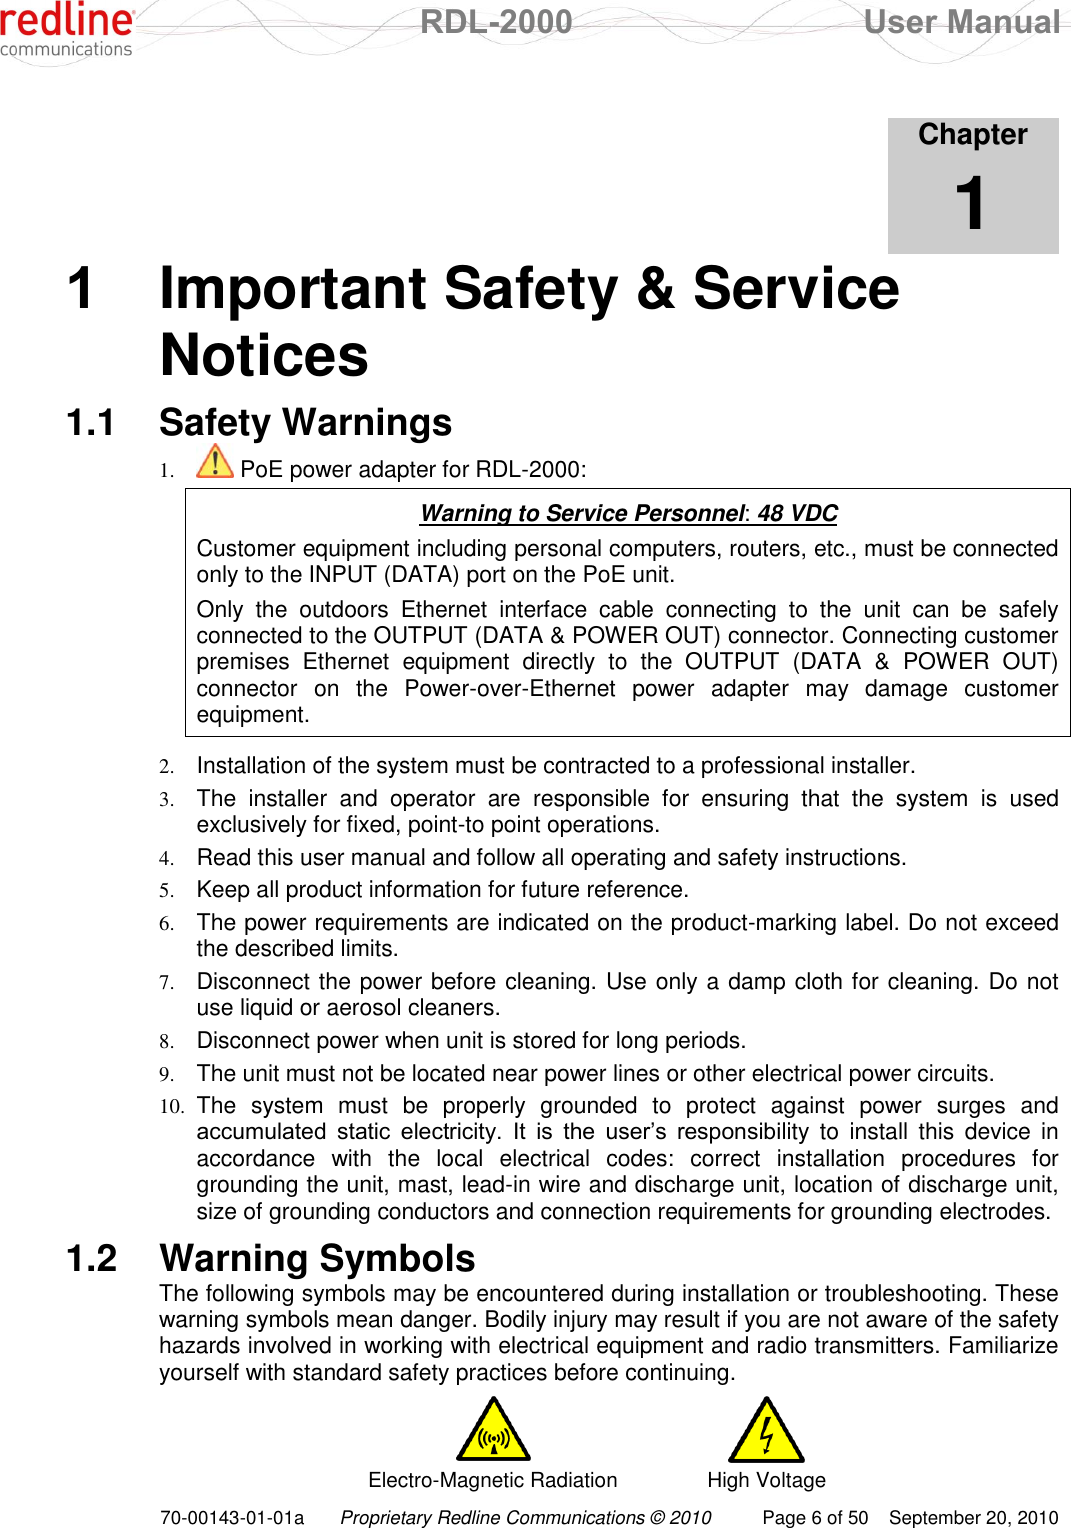  RDL-2000  User Manual 70-00143-01-01a Proprietary Redline Communications © 2010  Page 6 of 50  September 20, 2010            Chapter 1 1  Important Safety &amp; Service Notices 1.1  Safety Warnings 1.  PoE power adapter for RDL-2000:  Warning to Service Personnel: 48 VDC Customer equipment including personal computers, routers, etc., must be connected only to the INPUT (DATA) port on the PoE unit.  Only  the  outdoors  Ethernet  interface  cable  connecting  to  the  unit  can  be  safely connected to the OUTPUT (DATA &amp; POWER OUT) connector. Connecting customer premises  Ethernet  equipment  directly  to  the  OUTPUT  (DATA  &amp;  POWER  OUT) connector  on  the  Power-over-Ethernet  power  adapter  may  damage  customer equipment.  2. Installation of the system must be contracted to a professional installer. 3. The  installer  and  operator  are  responsible  for  ensuring  that  the  system  is  used exclusively for fixed, point-to point operations. 4. Read this user manual and follow all operating and safety instructions. 5. Keep all product information for future reference. 6. The power requirements are indicated on the product-marking label. Do not exceed the described limits. 7. Disconnect the power before cleaning. Use only a damp cloth for cleaning. Do not use liquid or aerosol cleaners.  8. Disconnect power when unit is stored for long periods. 9. The unit must not be located near power lines or other electrical power circuits. 10. The  system  must  be  properly  grounded  to  protect  against  power  surges  and accumulated  static  electricity.  It  is  the  user‟s  responsibility  to  install  this  device  in accordance  with  the  local  electrical  codes:  correct  installation  procedures  for grounding the unit, mast, lead-in wire and discharge unit, location of discharge unit, size of grounding conductors and connection requirements for grounding electrodes. 1.2  Warning Symbols The following symbols may be encountered during installation or troubleshooting. These warning symbols mean danger. Bodily injury may result if you are not aware of the safety hazards involved in working with electrical equipment and radio transmitters. Familiarize yourself with standard safety practices before continuing.   Electro-Magnetic Radiation High Voltage 